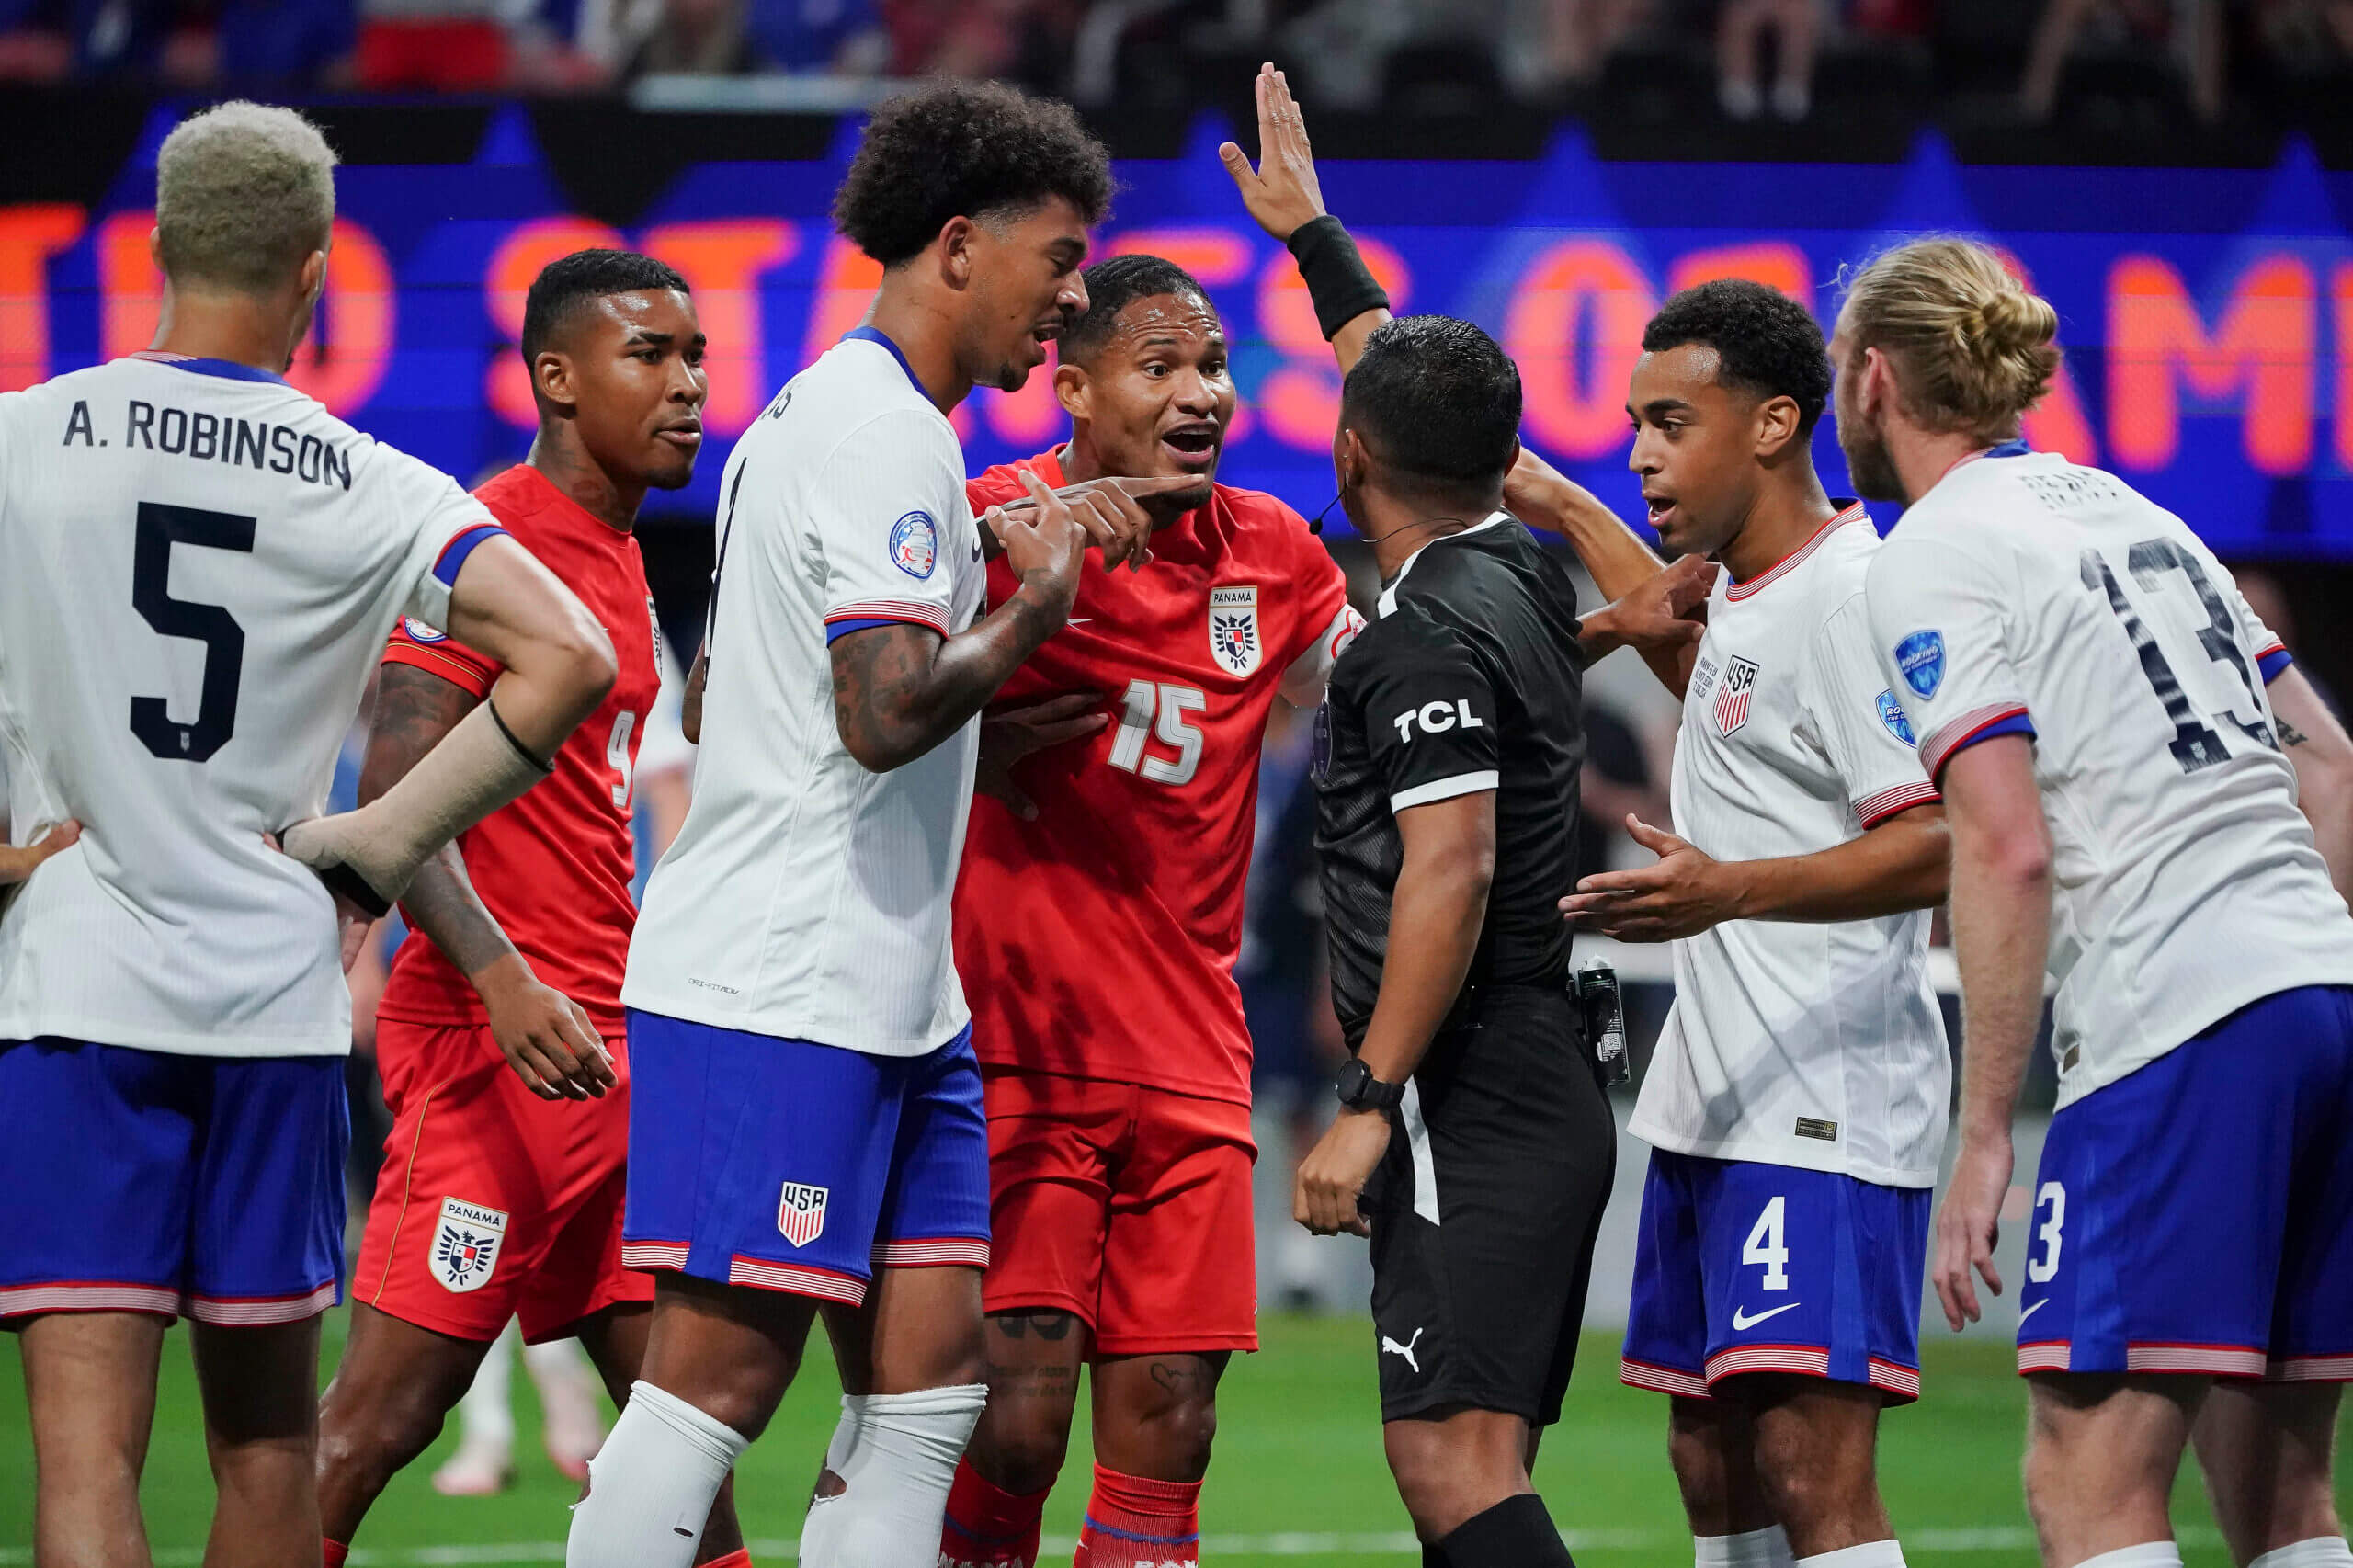 The Panama Game was a major test for this USMNT generation – and they failed